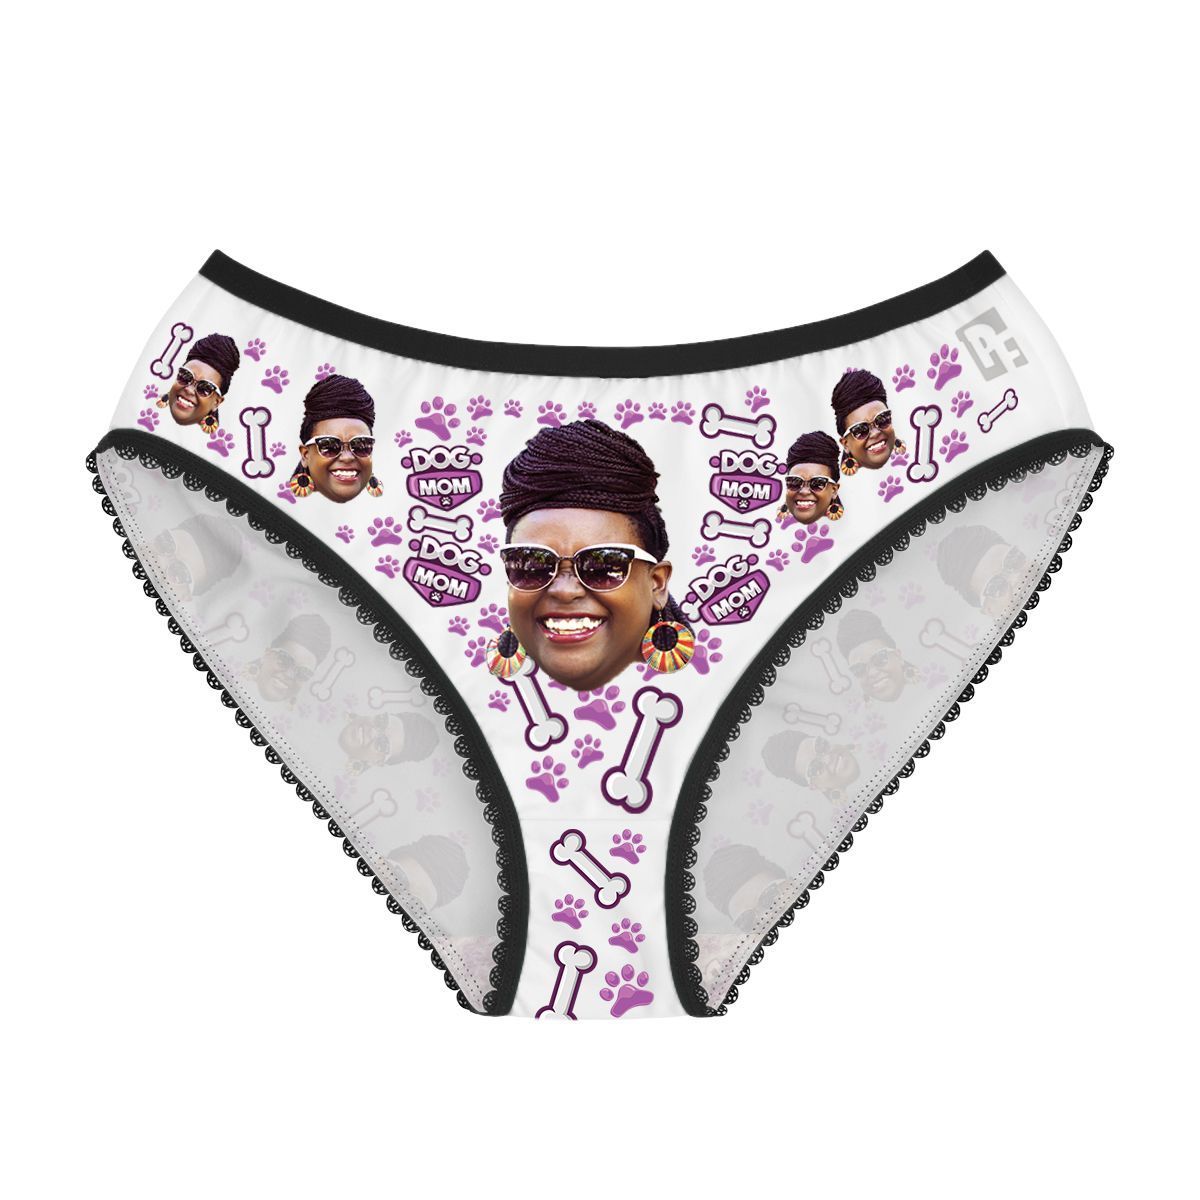 White Dog mom women's underwear briefs personalized with photo printed on them